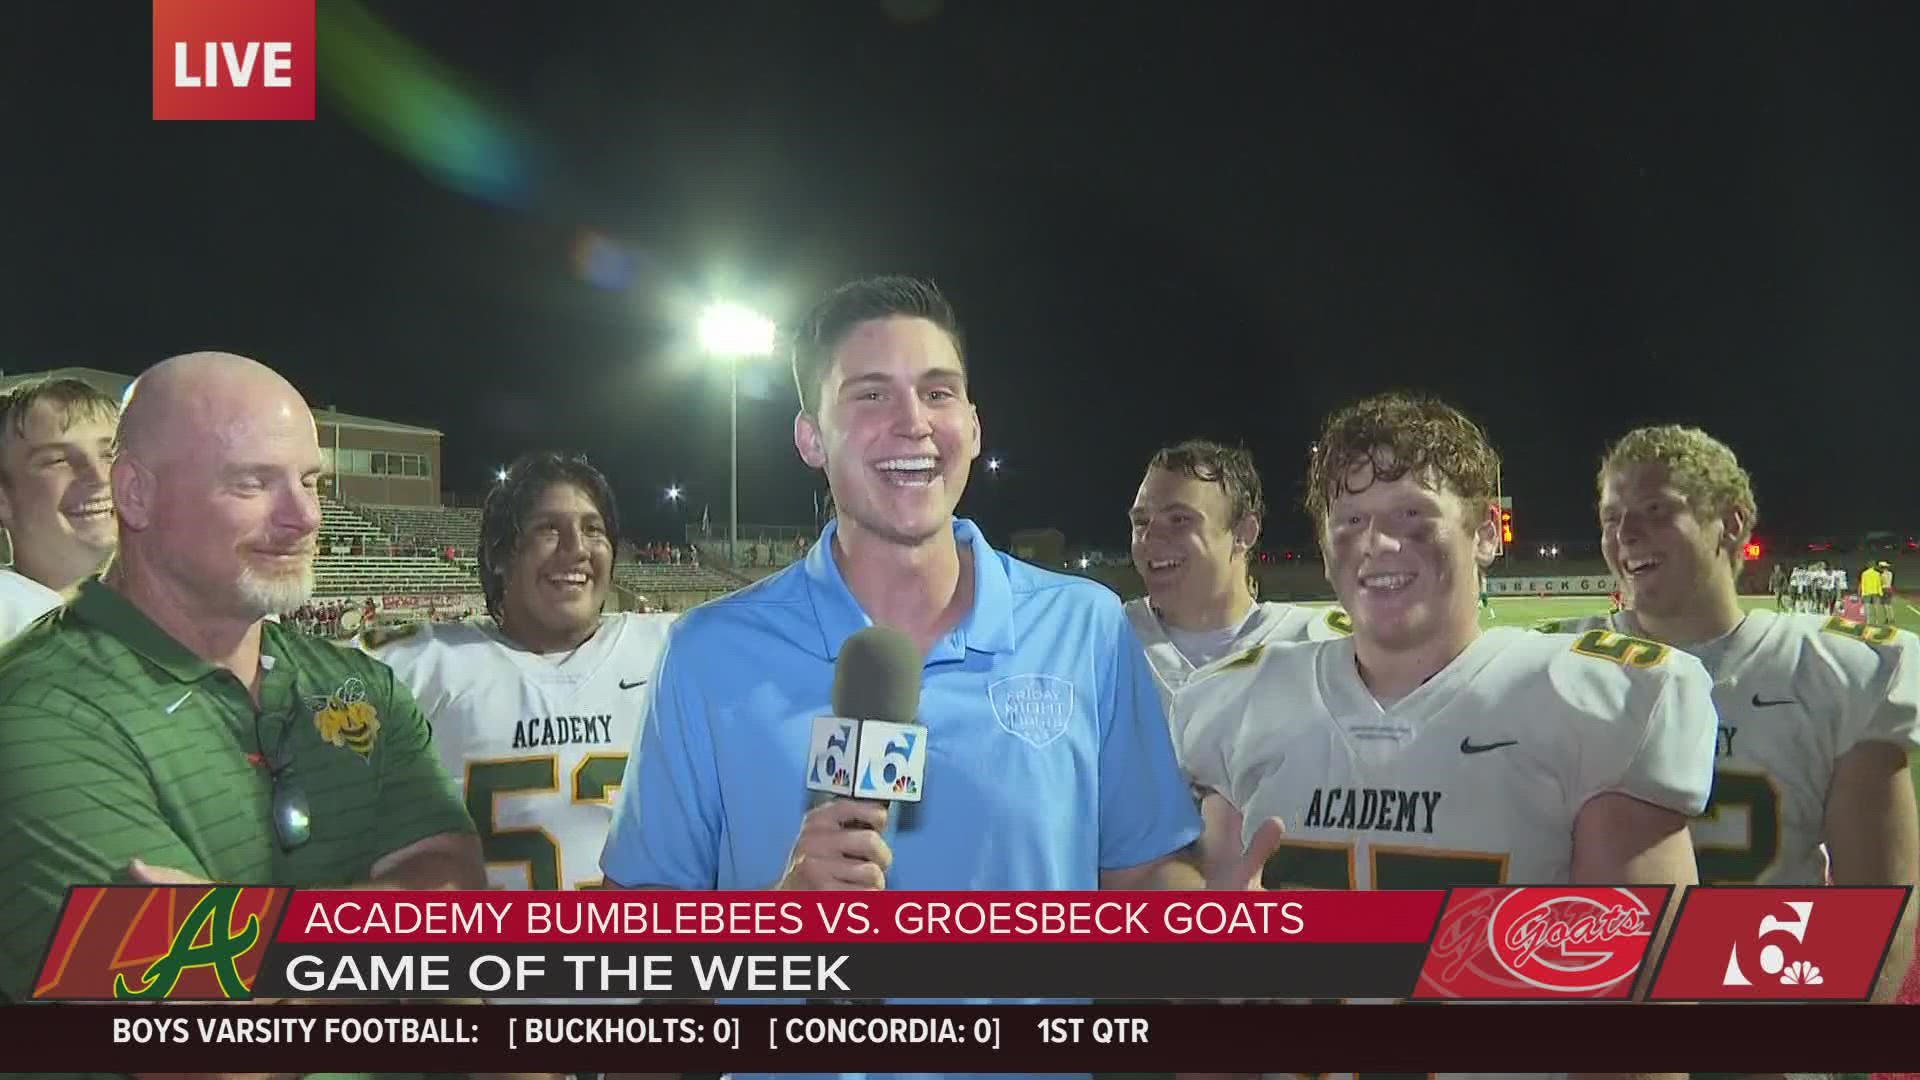 The Academy Bees are awarded the FNL Week 3 Game of the Week Trophy